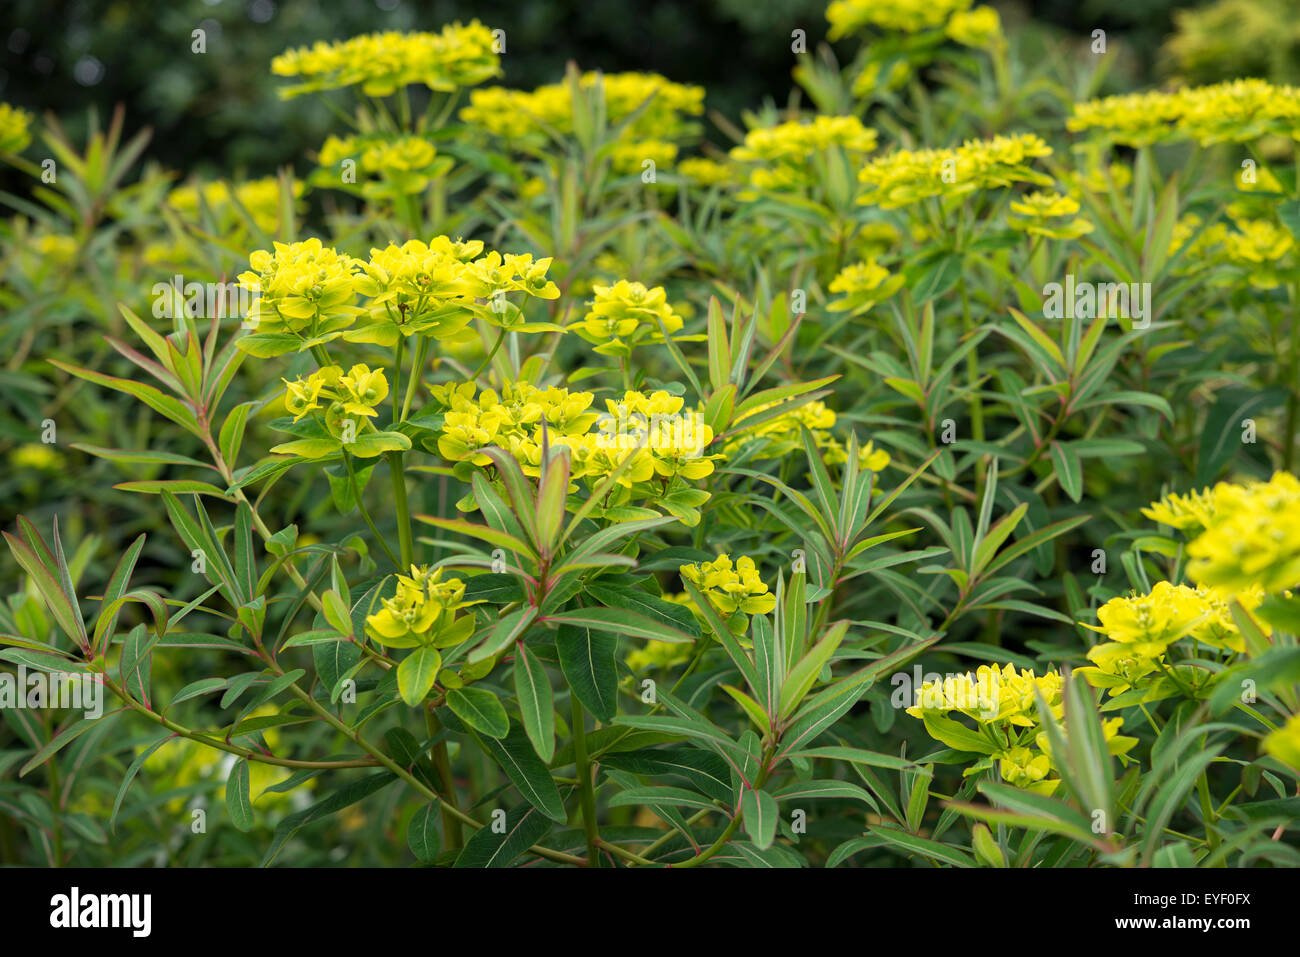 Euphorbia sikkimensis. A tall summer flowering perennial with yellow flower and bushy foliage. Stock Photo